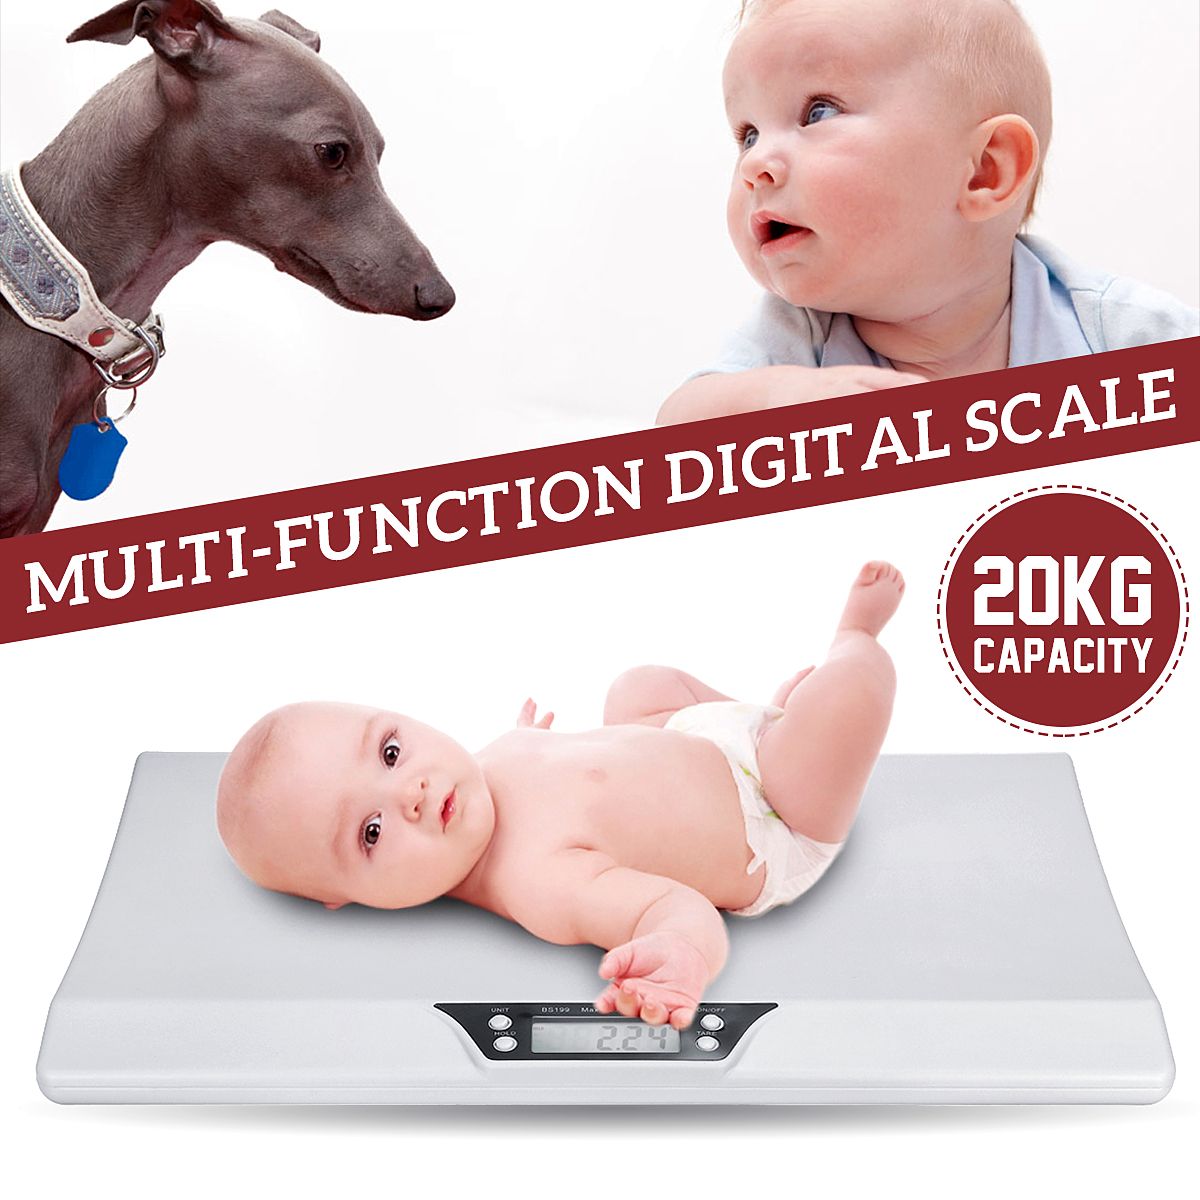 20KG-Digital-Baby-Scale-Weight-InfantBaby-Pet-Weight-Scales-Measure-1702757